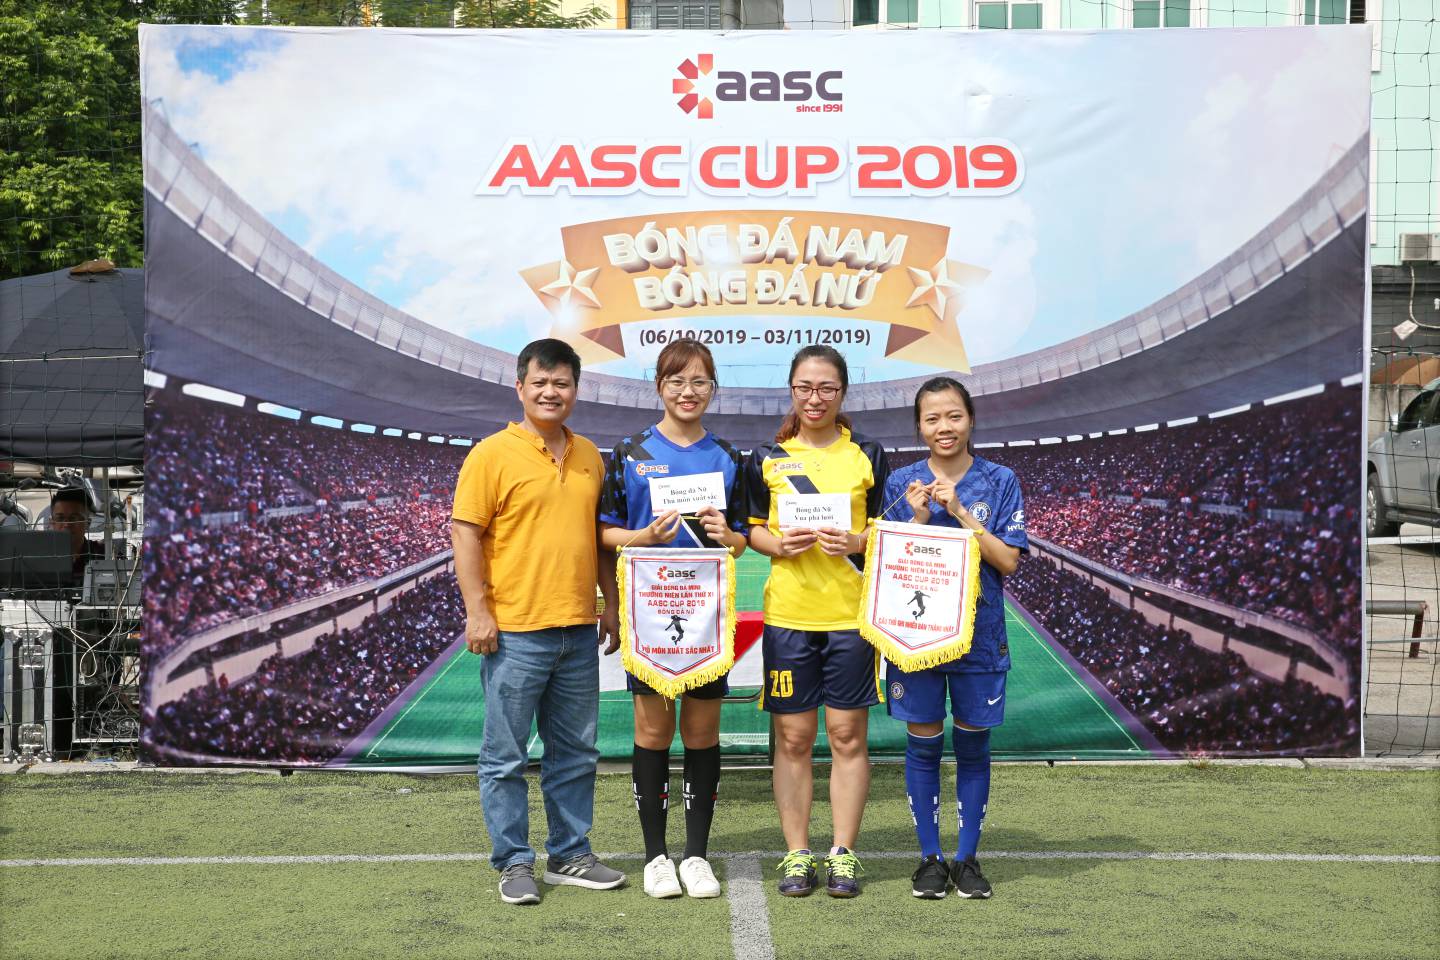 2019 11 05 AASCCUP 002